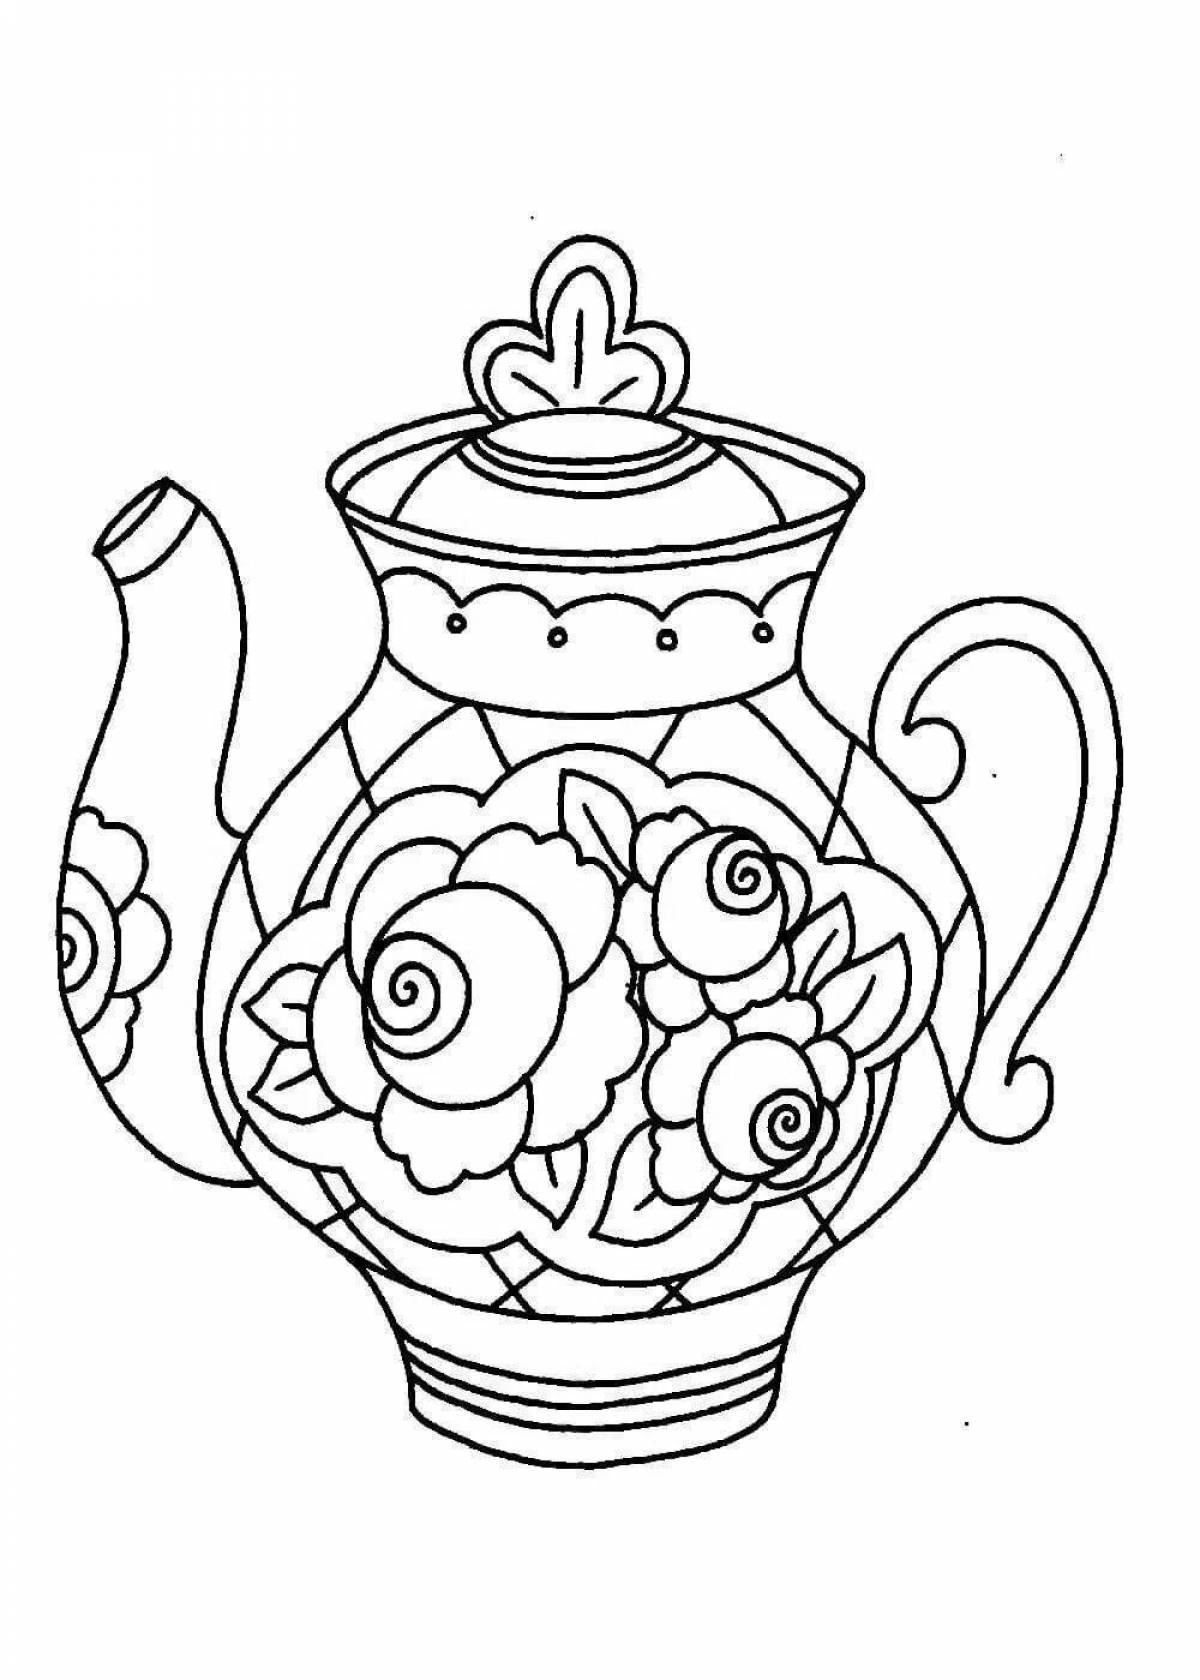 Merry jug gzhel coloring for kids